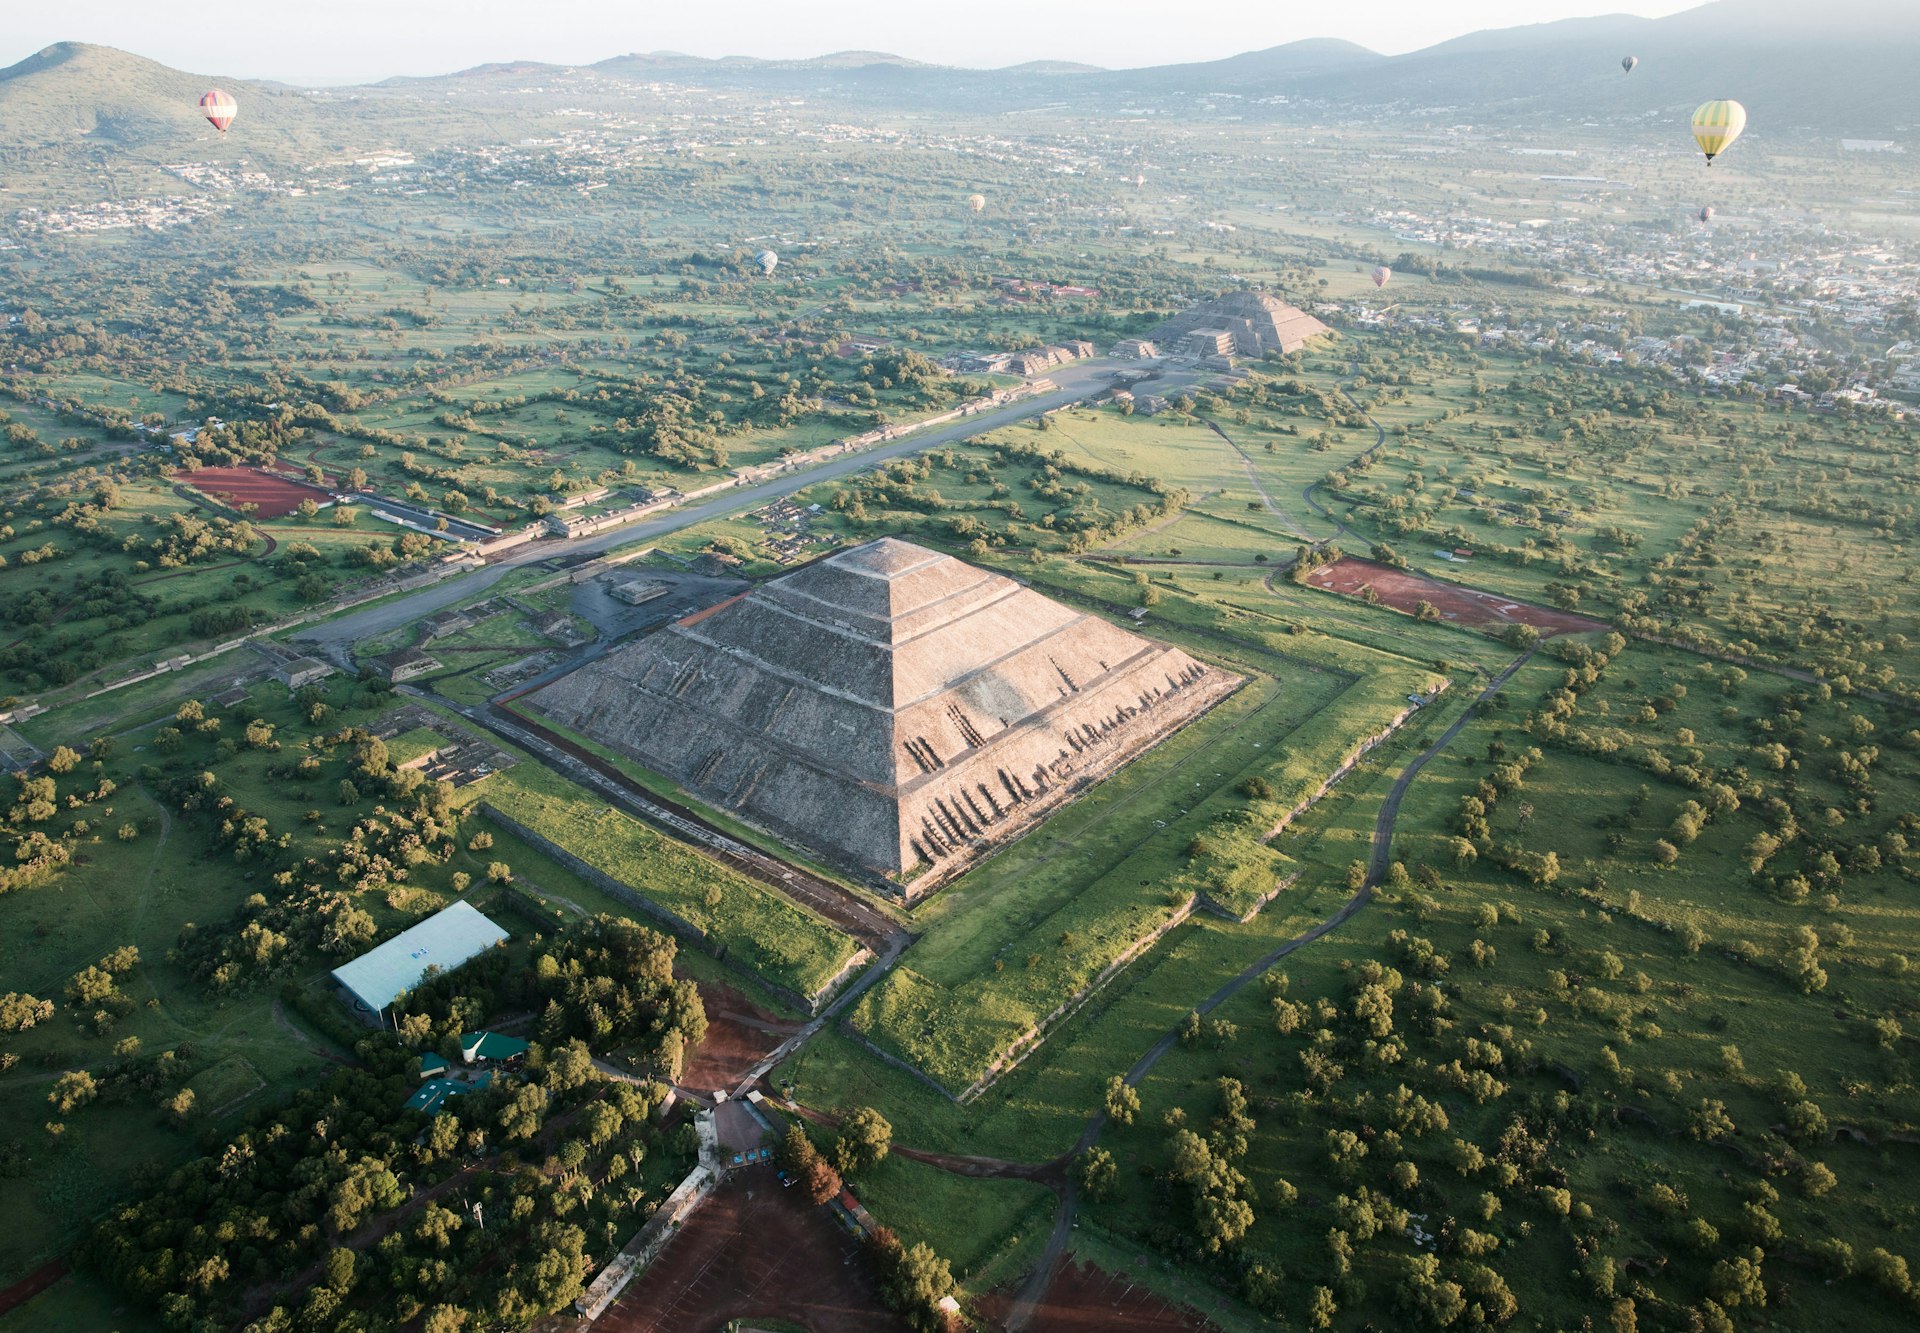 Aerial of Teotihuacan, as seen from an air balloon